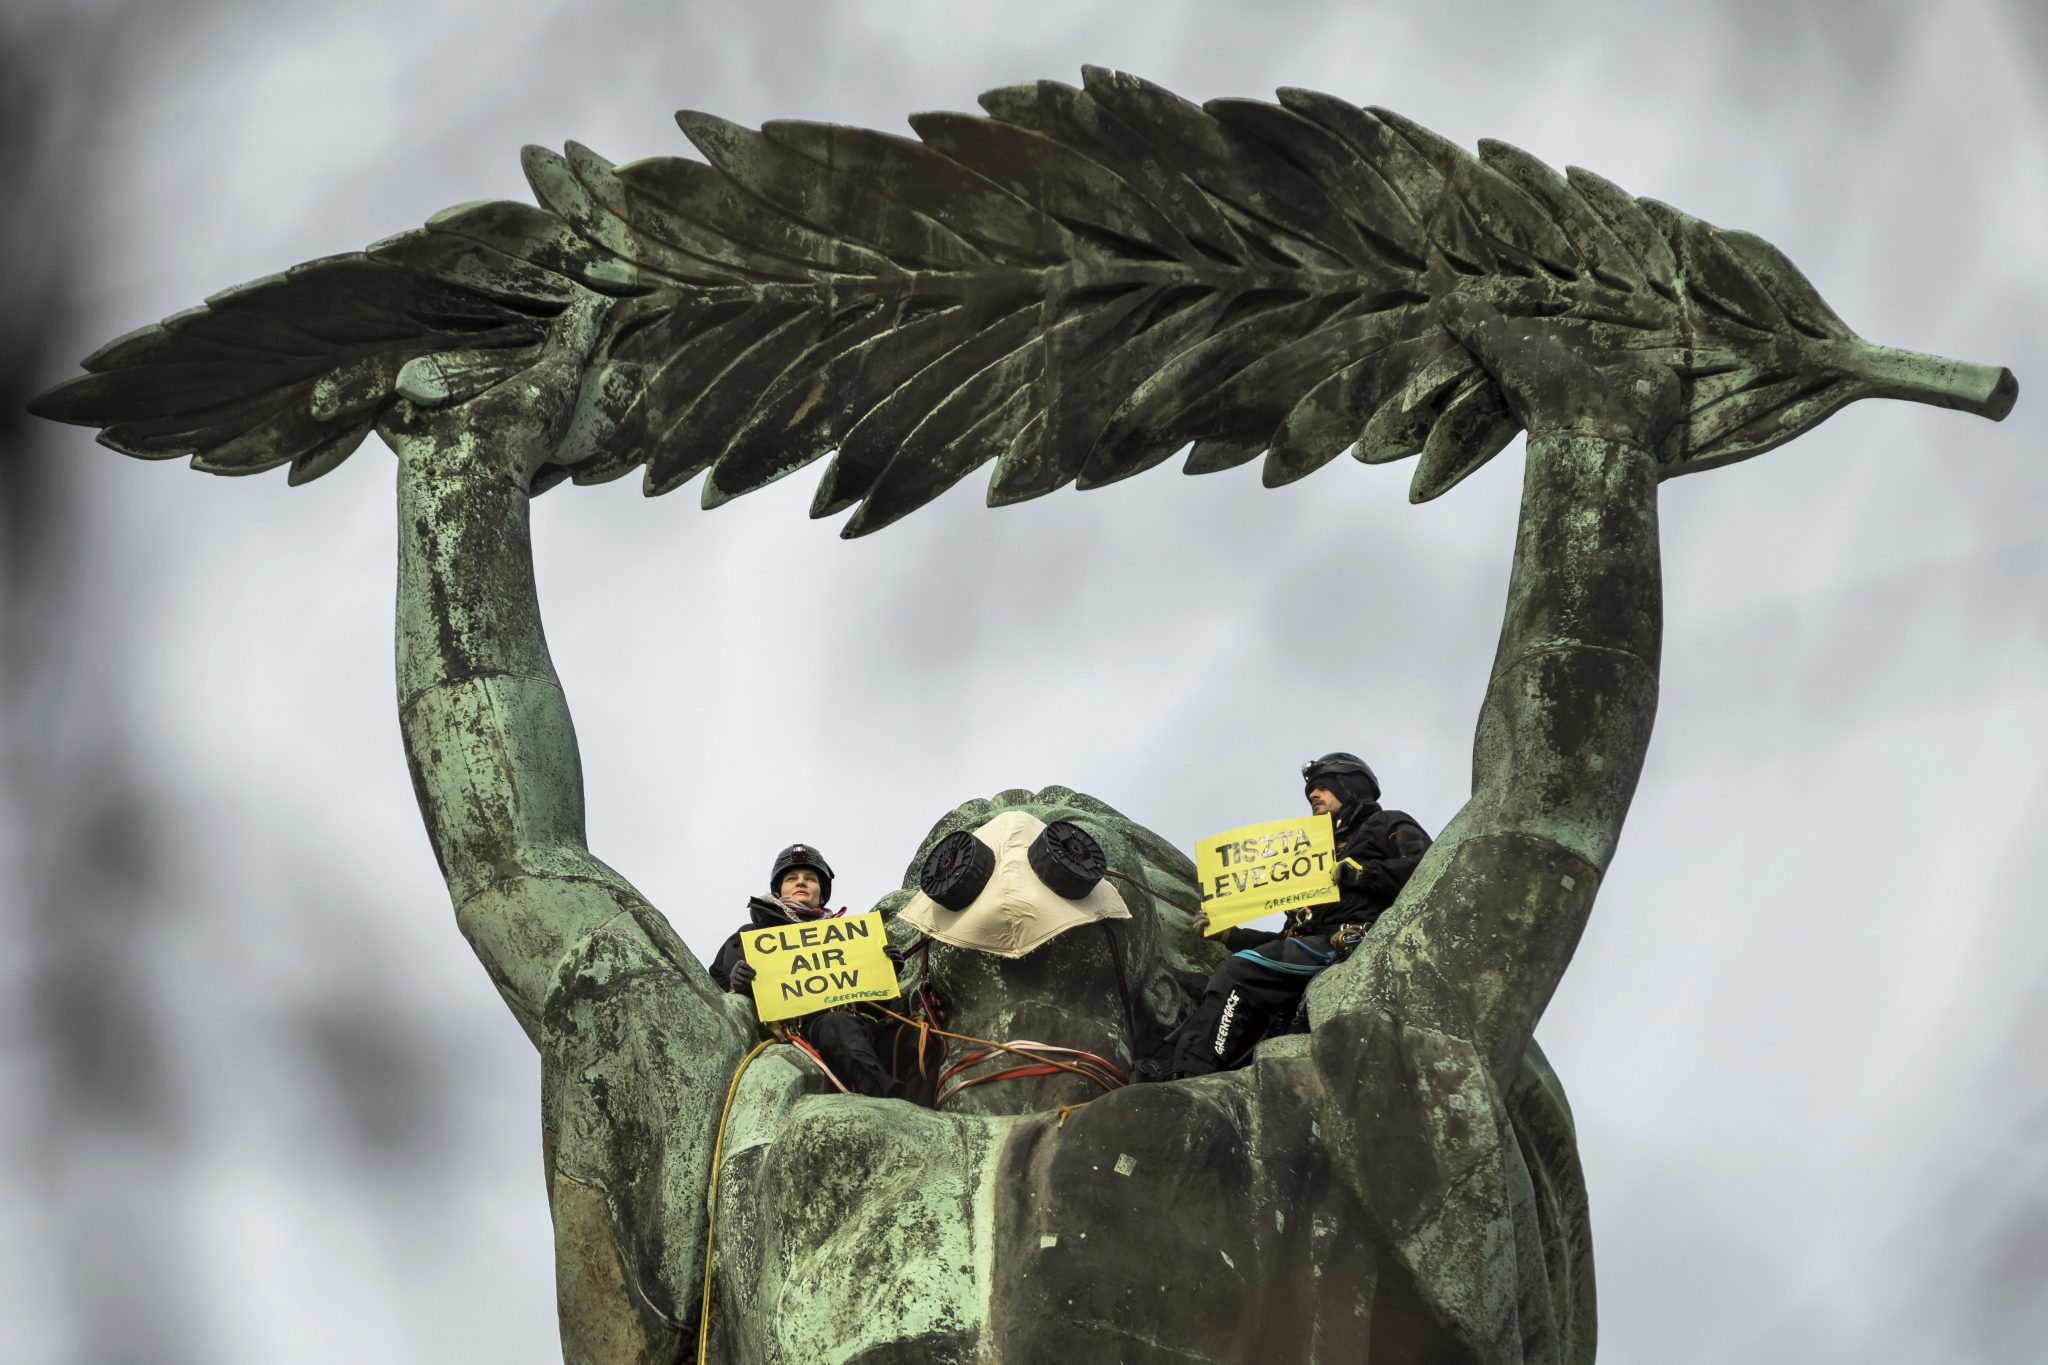 Greenpeace Activists Put Mask on Liberty Statue in Support of Clean Air Movement